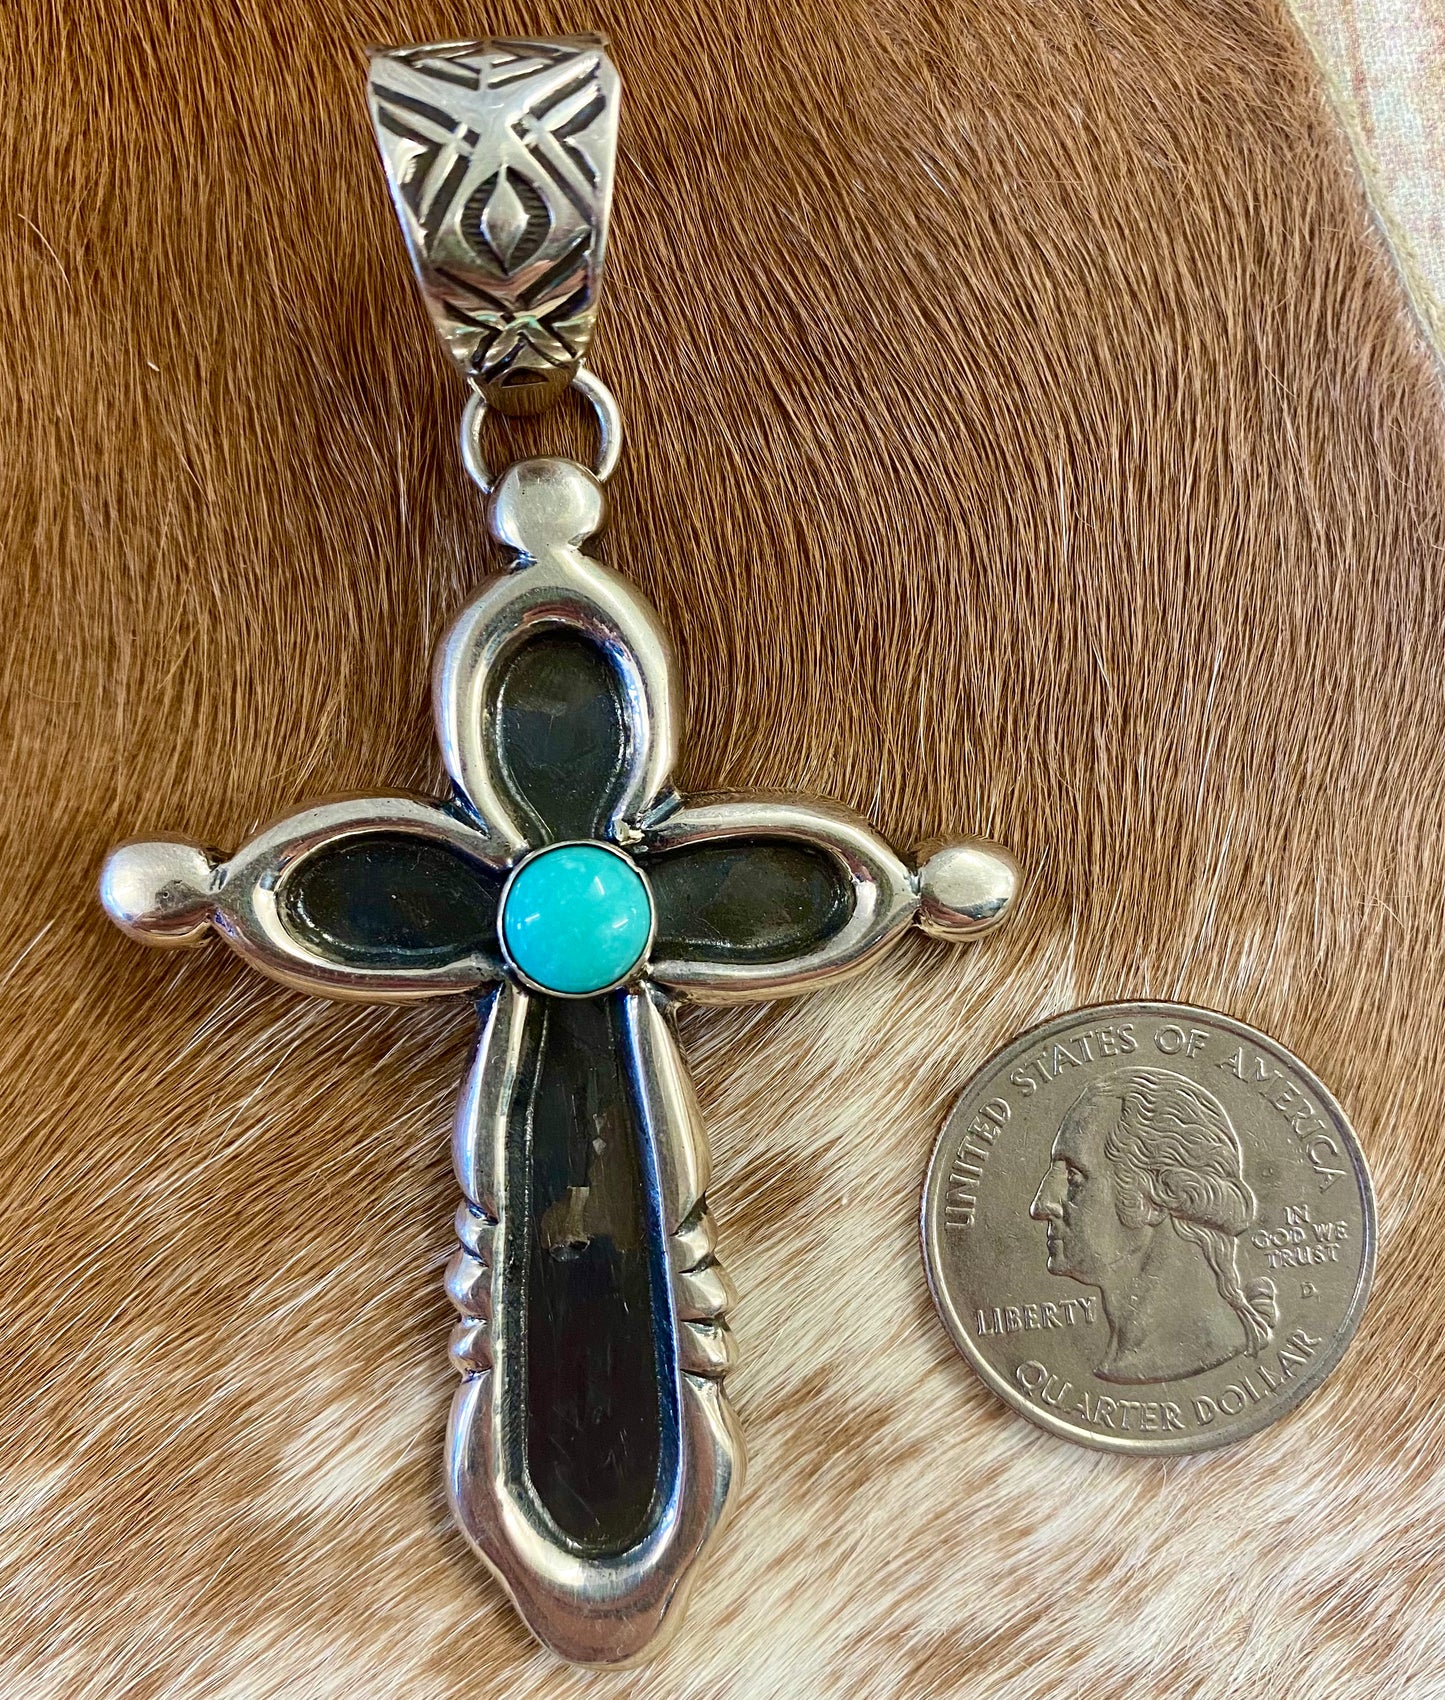 Beautiful sterling silver Native made turquoise cross pendant. Stamped sterling and signed H. JOE by Native American artist silversmith. The perfect cross to wear on any length chain necklace or a 6-7mm Navajo pearl necklace.   Size: 3” Inches length without bale x 2” inches width - bale .5” inch length   Signed: YES "H. JOE"  Hallmark/Artist: H. JOE  Stone: Turquoise 